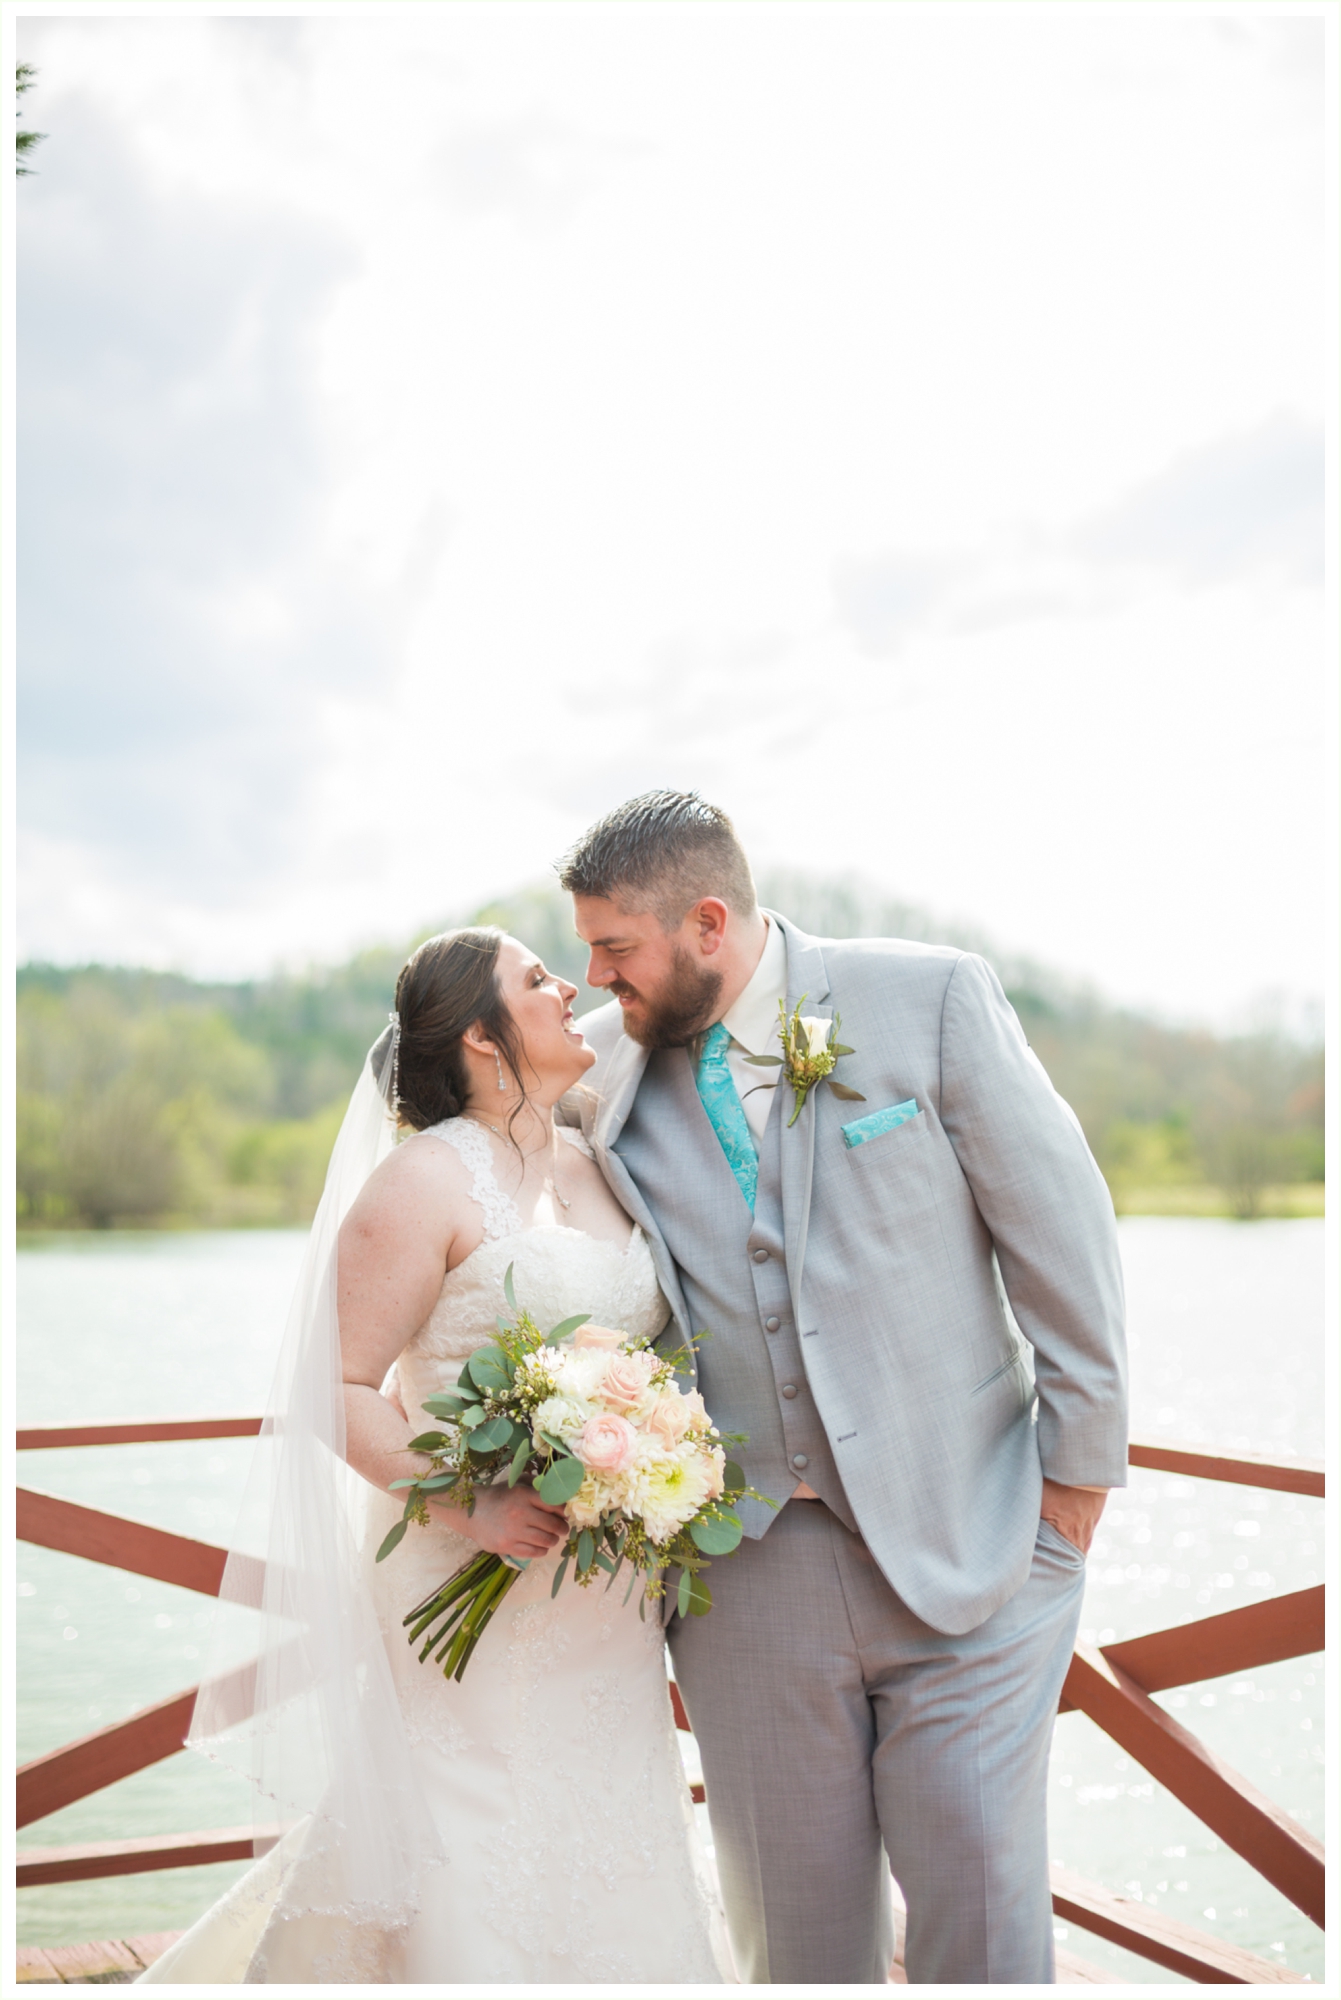 beautiful bride and groom lake portraits at spring lake events wedding in Georgia